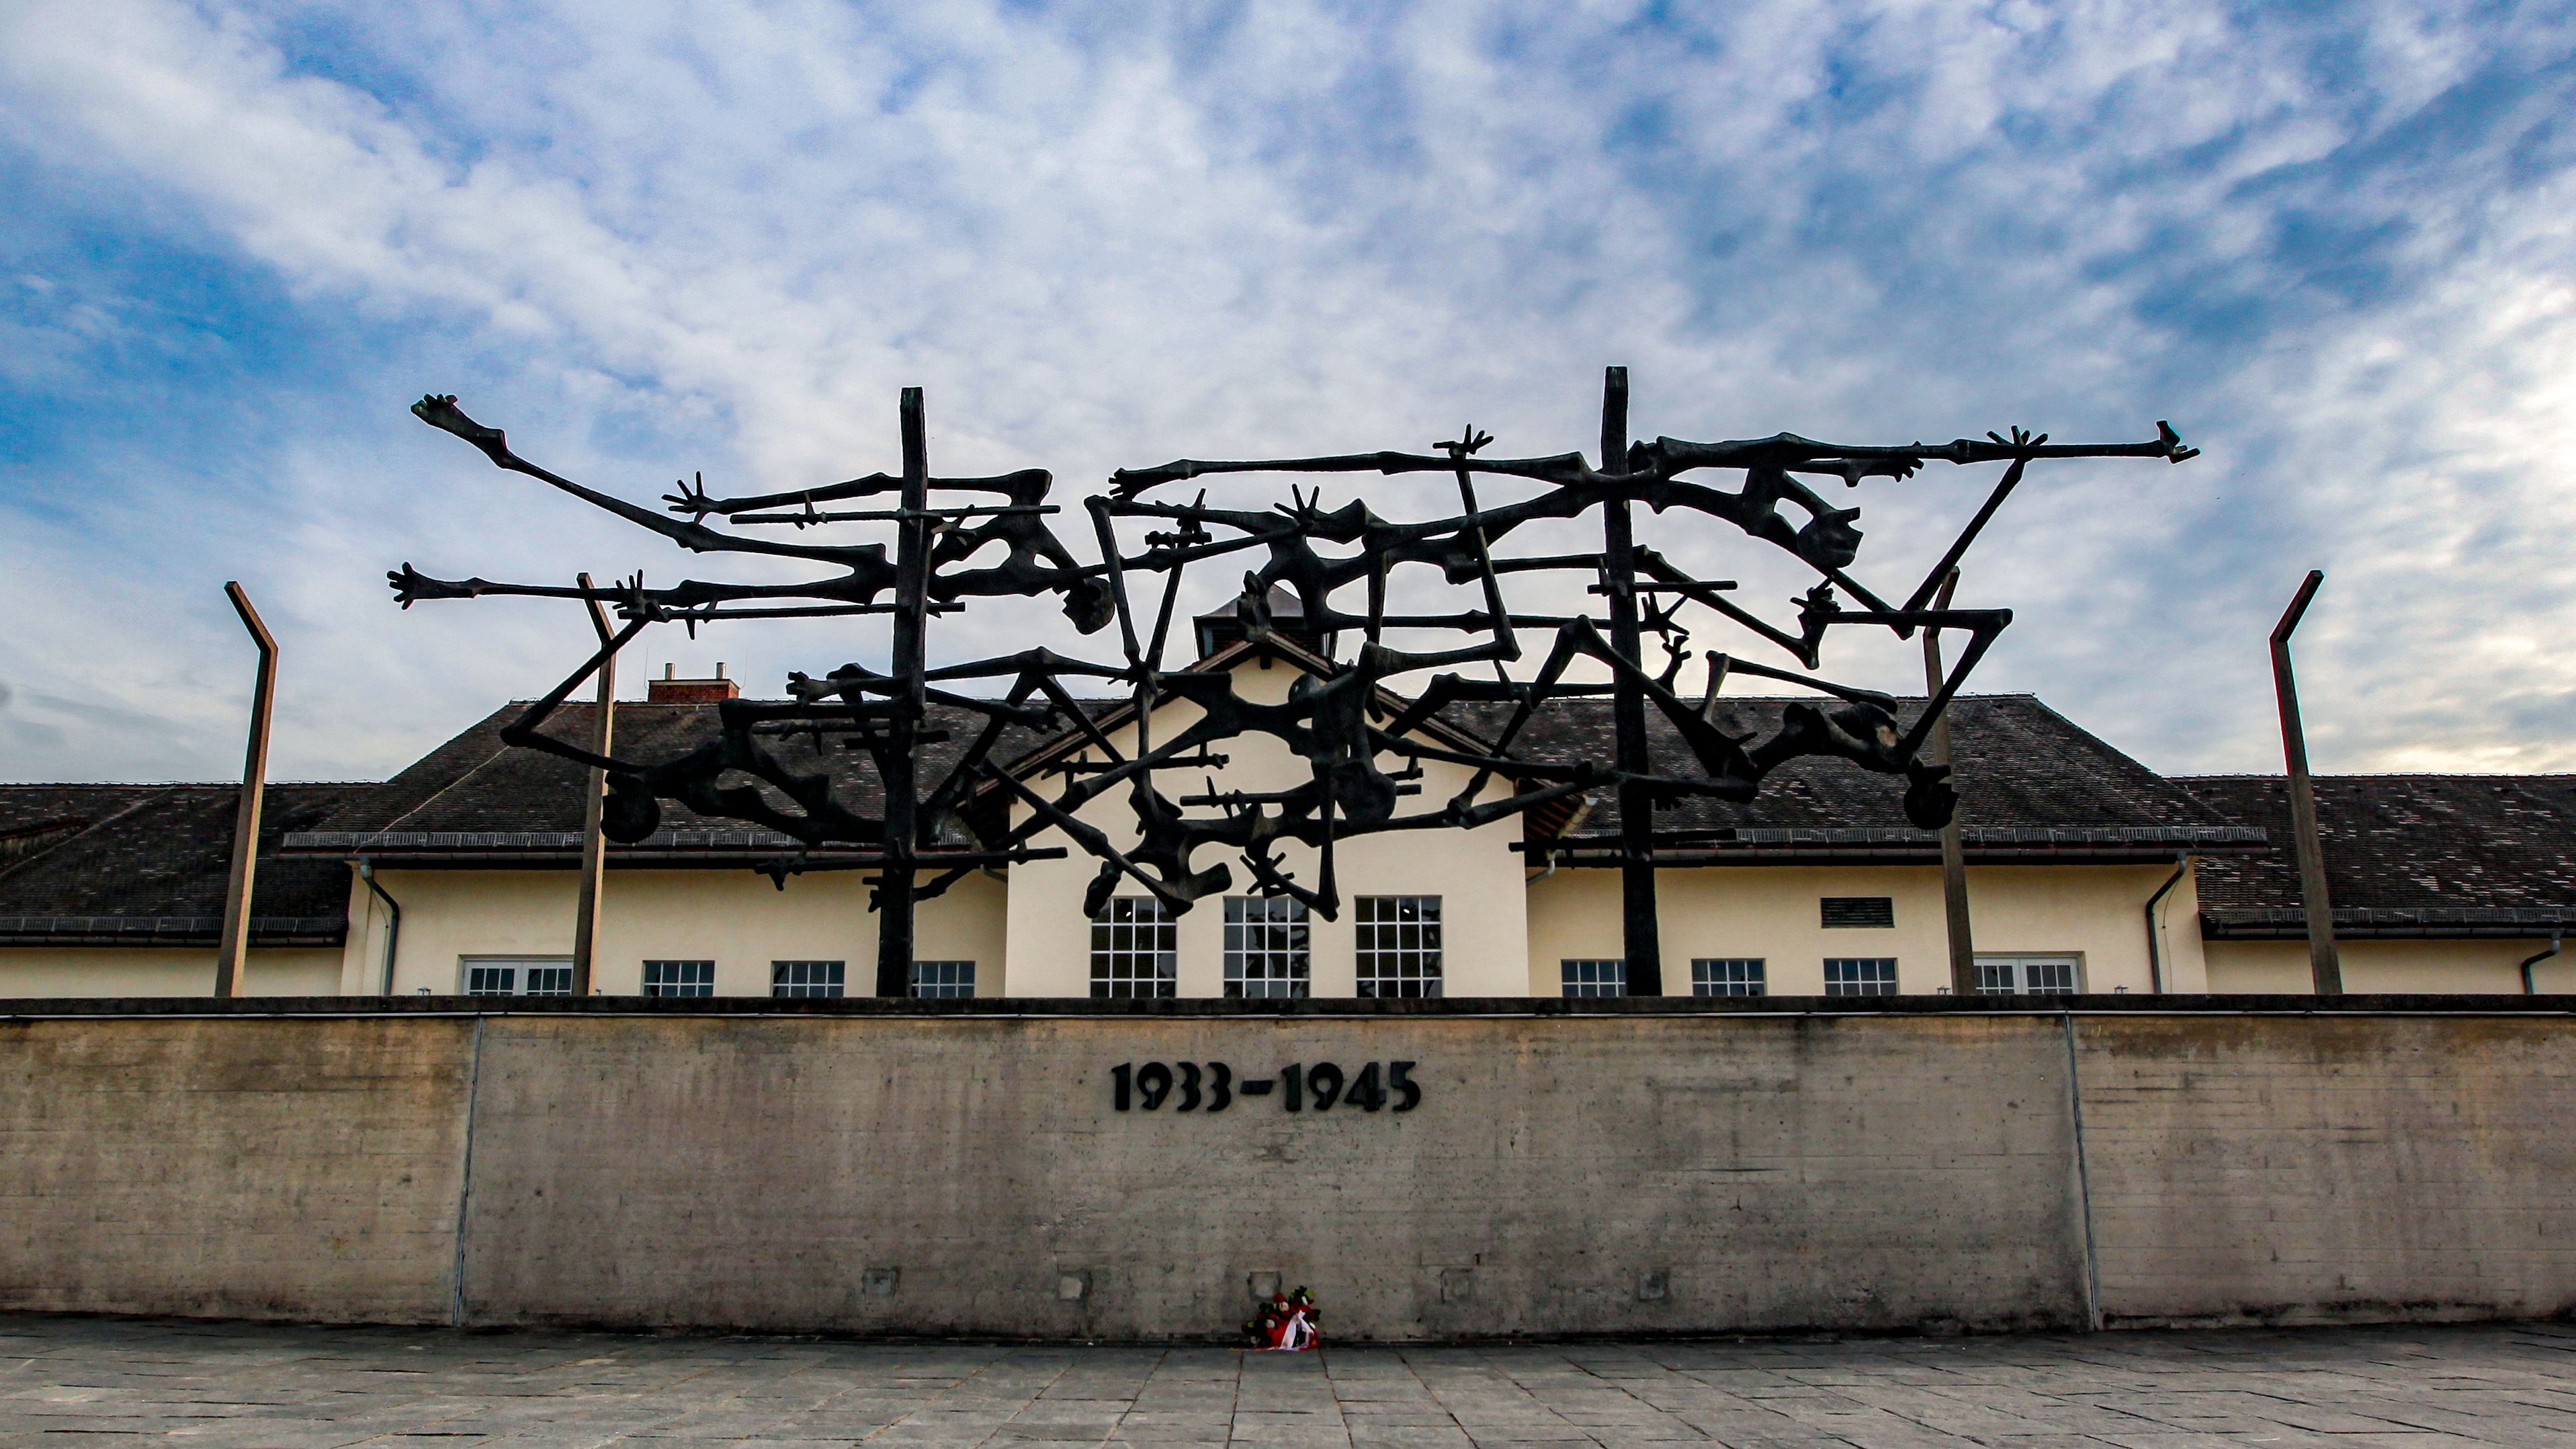 Phot of International Memorial in front of the "Jourhaus" at Concentration Camp Memorial Site Dachau. Dramatic blue sky with white streaming clouds. Photo: City of Dachau